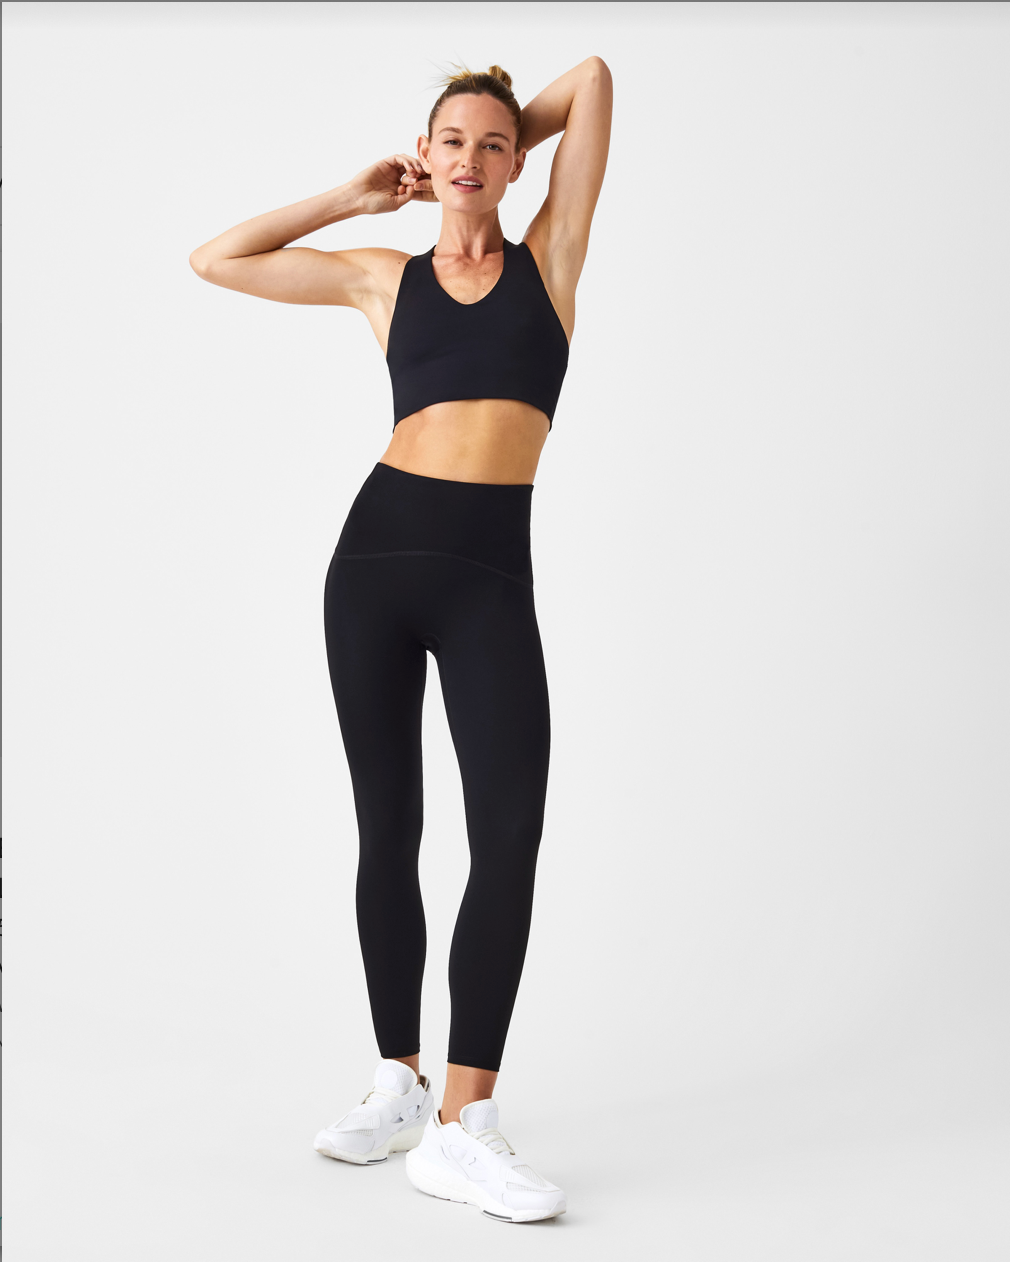 Booty Boost® active 7/8 leggings